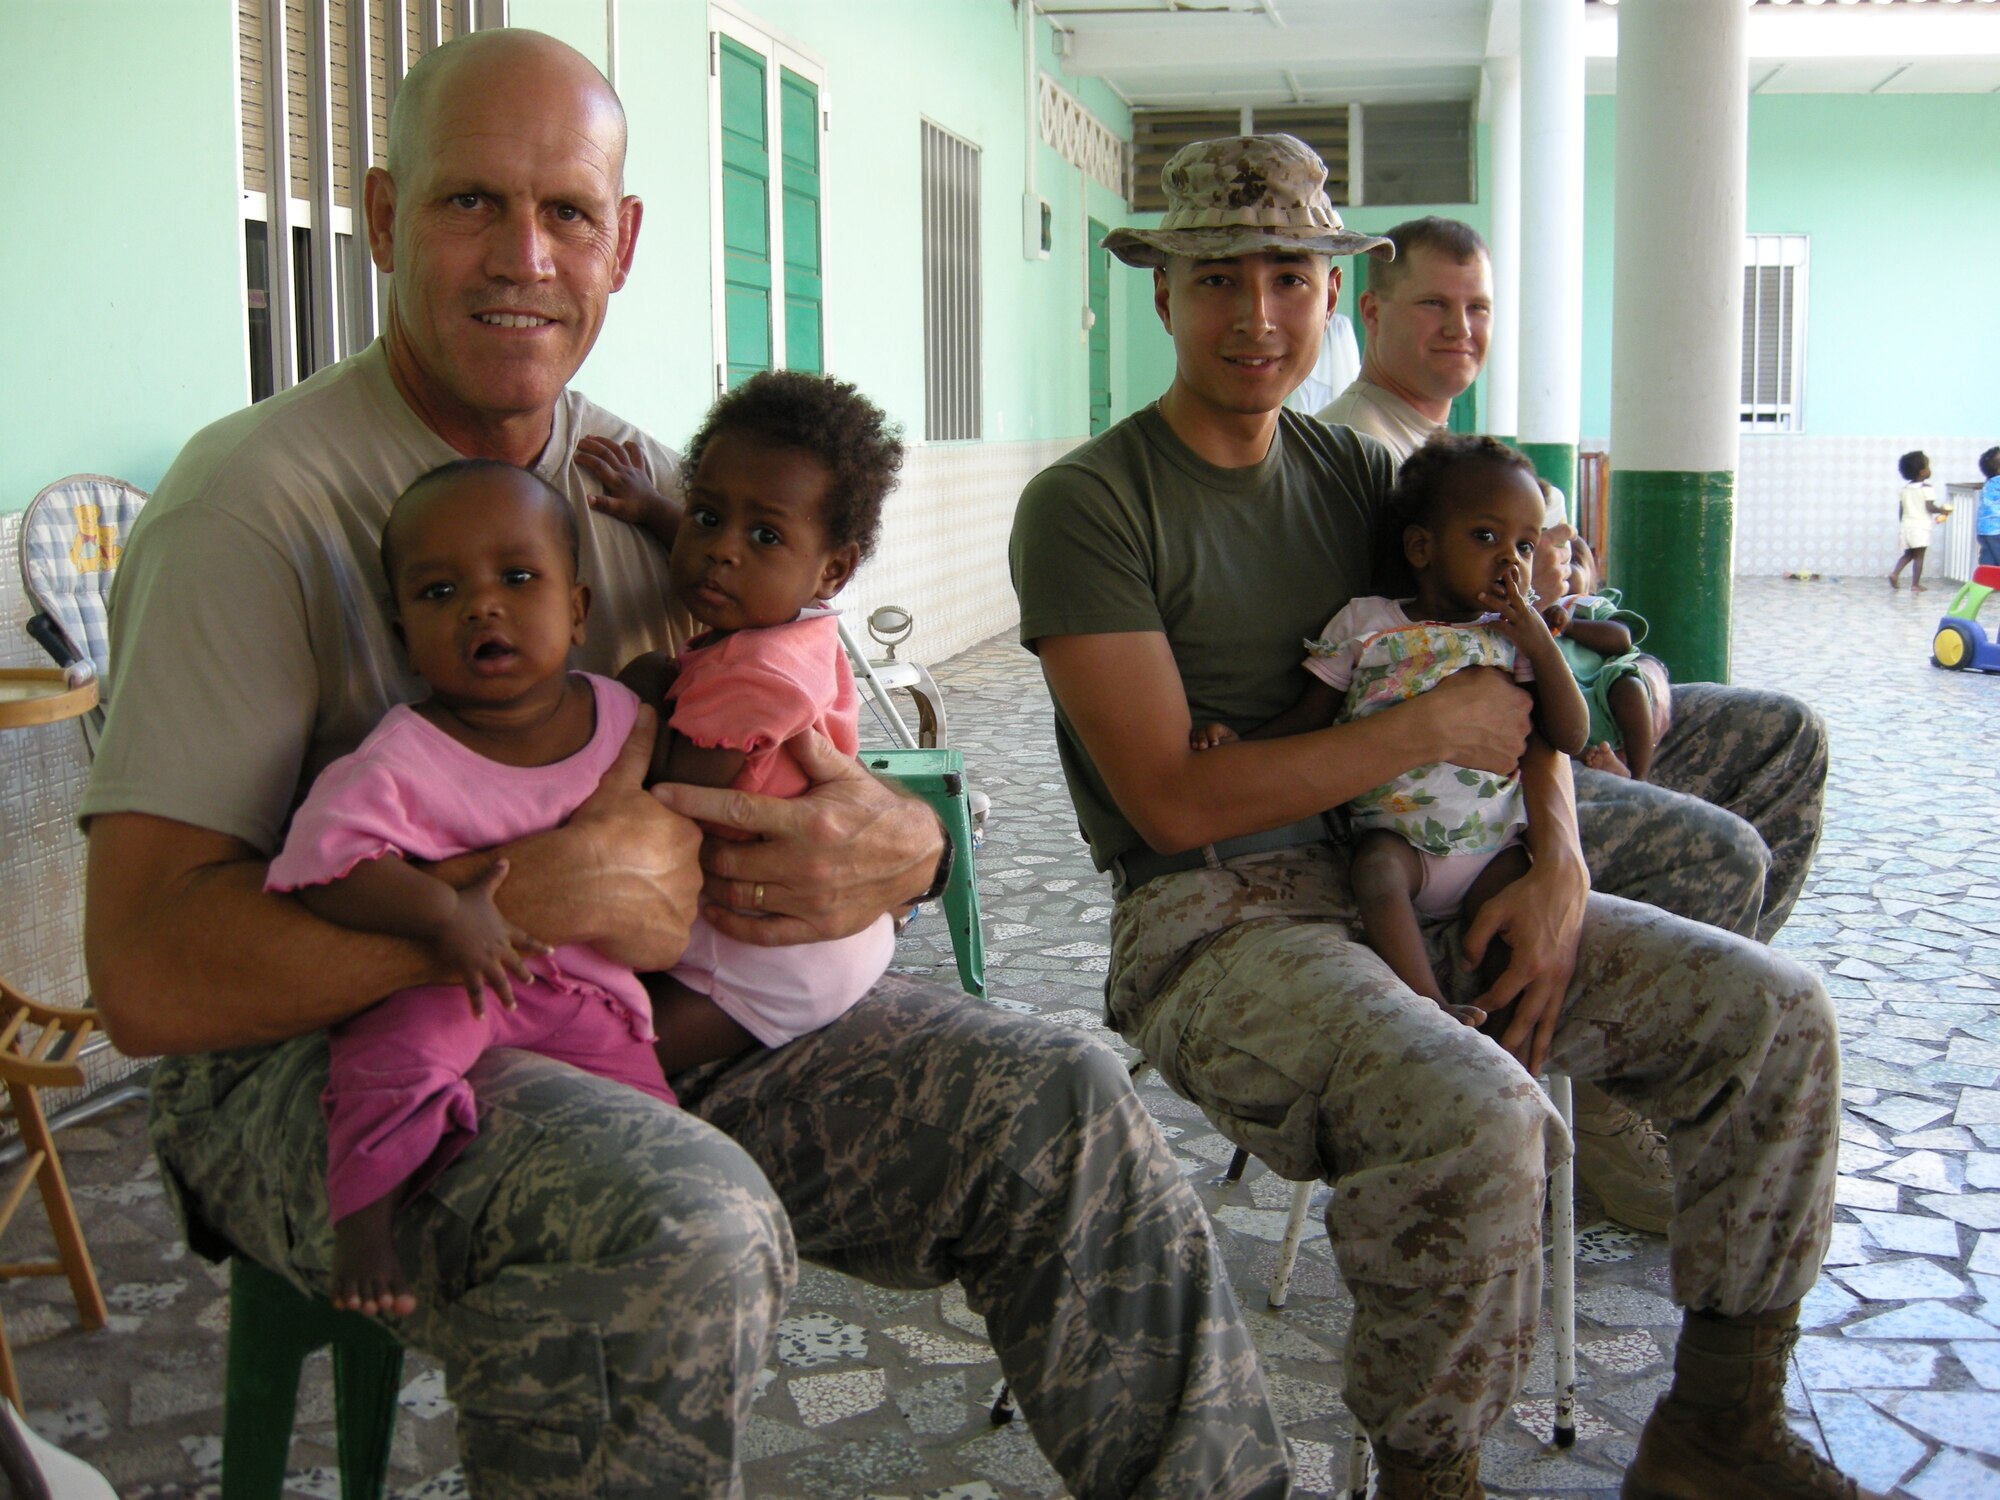 161st ARW MSgt David Zibell (left) and other team members holding babies at the Djibouti orphanage, part of the efforts that resulted in Zibell receiving the Military Outstanding Volunteer Service Medal.